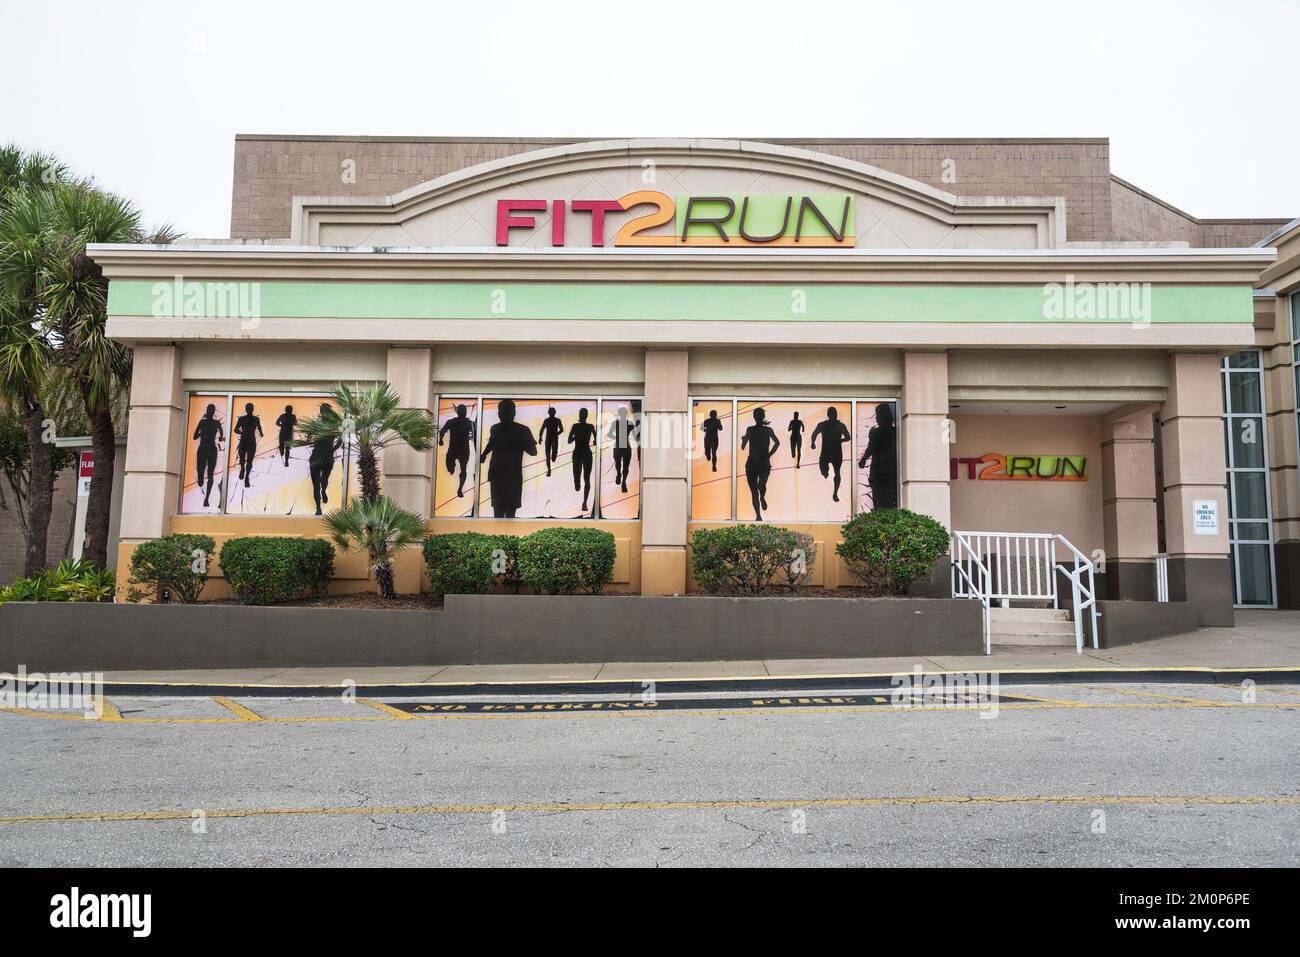 Mural of runners in silhouette grace the exterior of FIT 2 RUN, fitness training center in a Florida shopping mall. Stock Photo